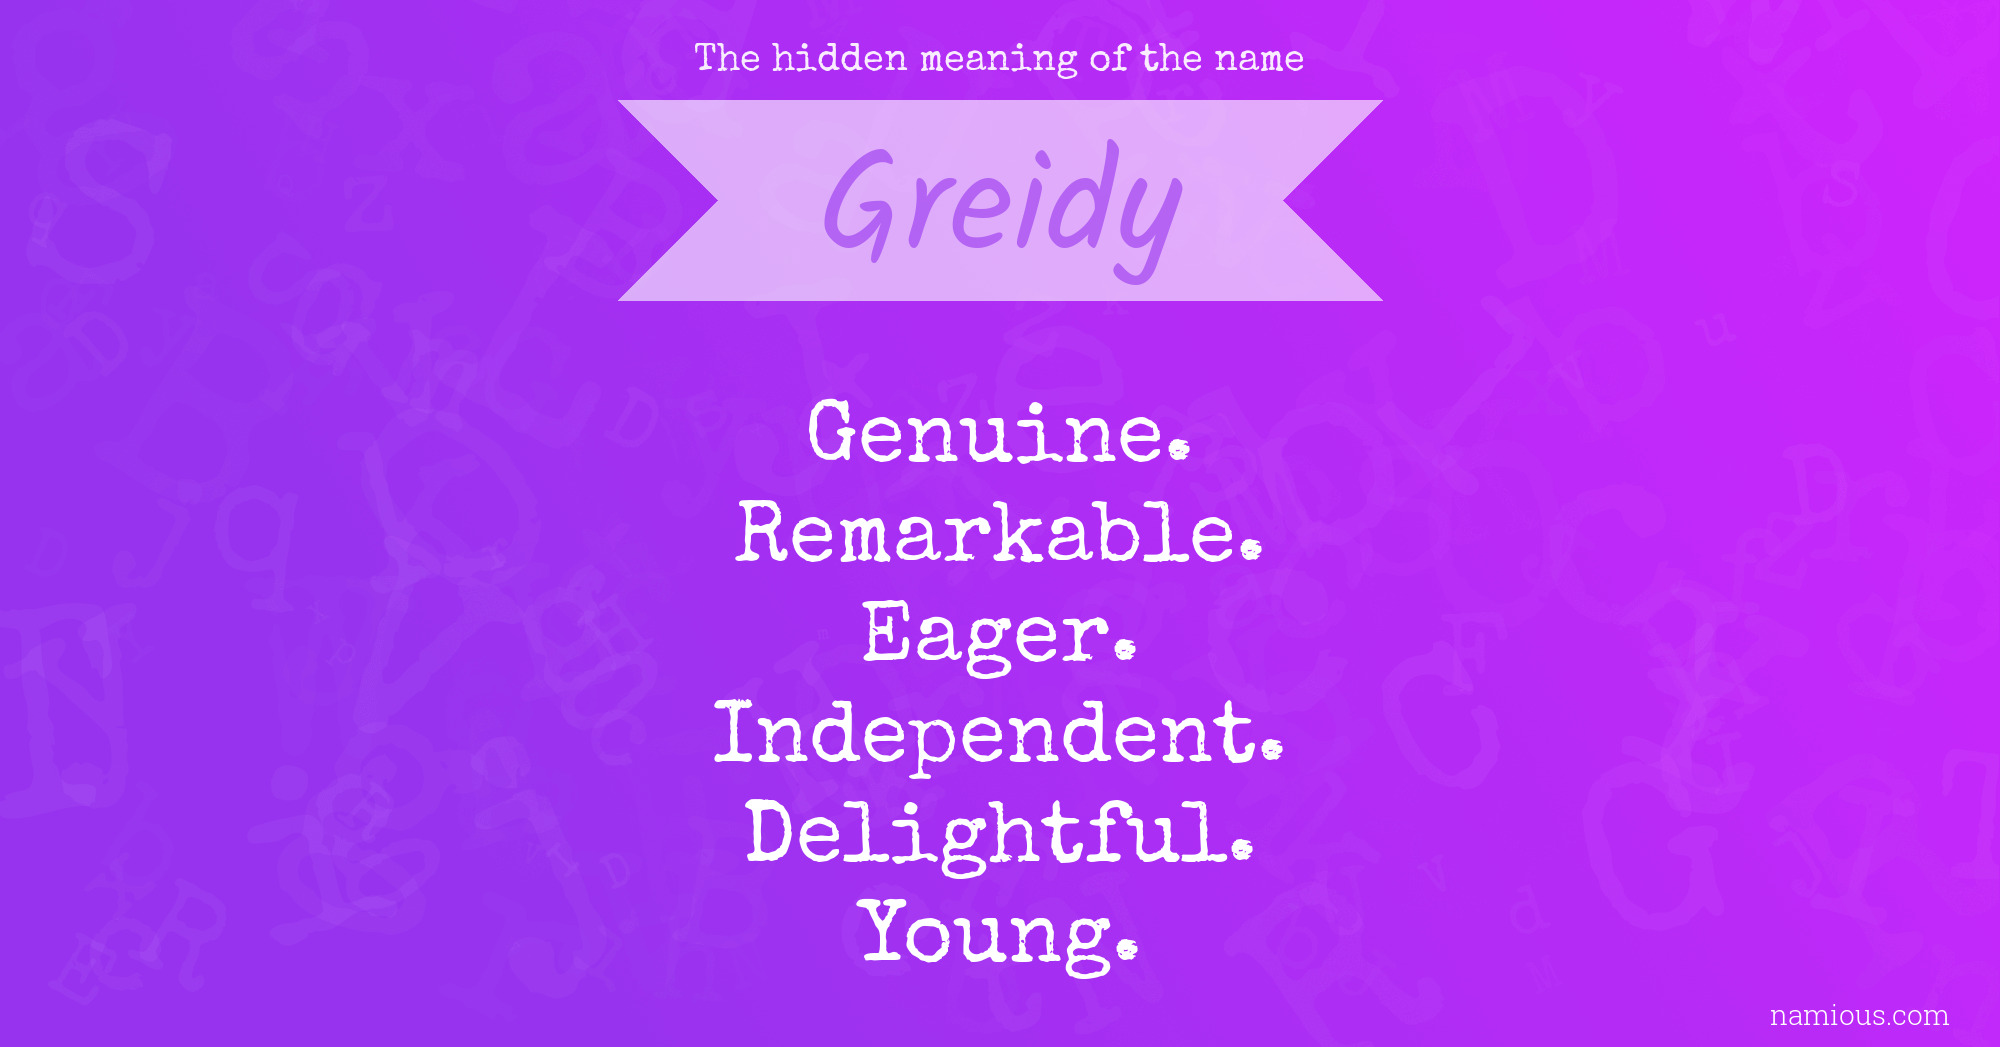 The hidden meaning of the name Greidy